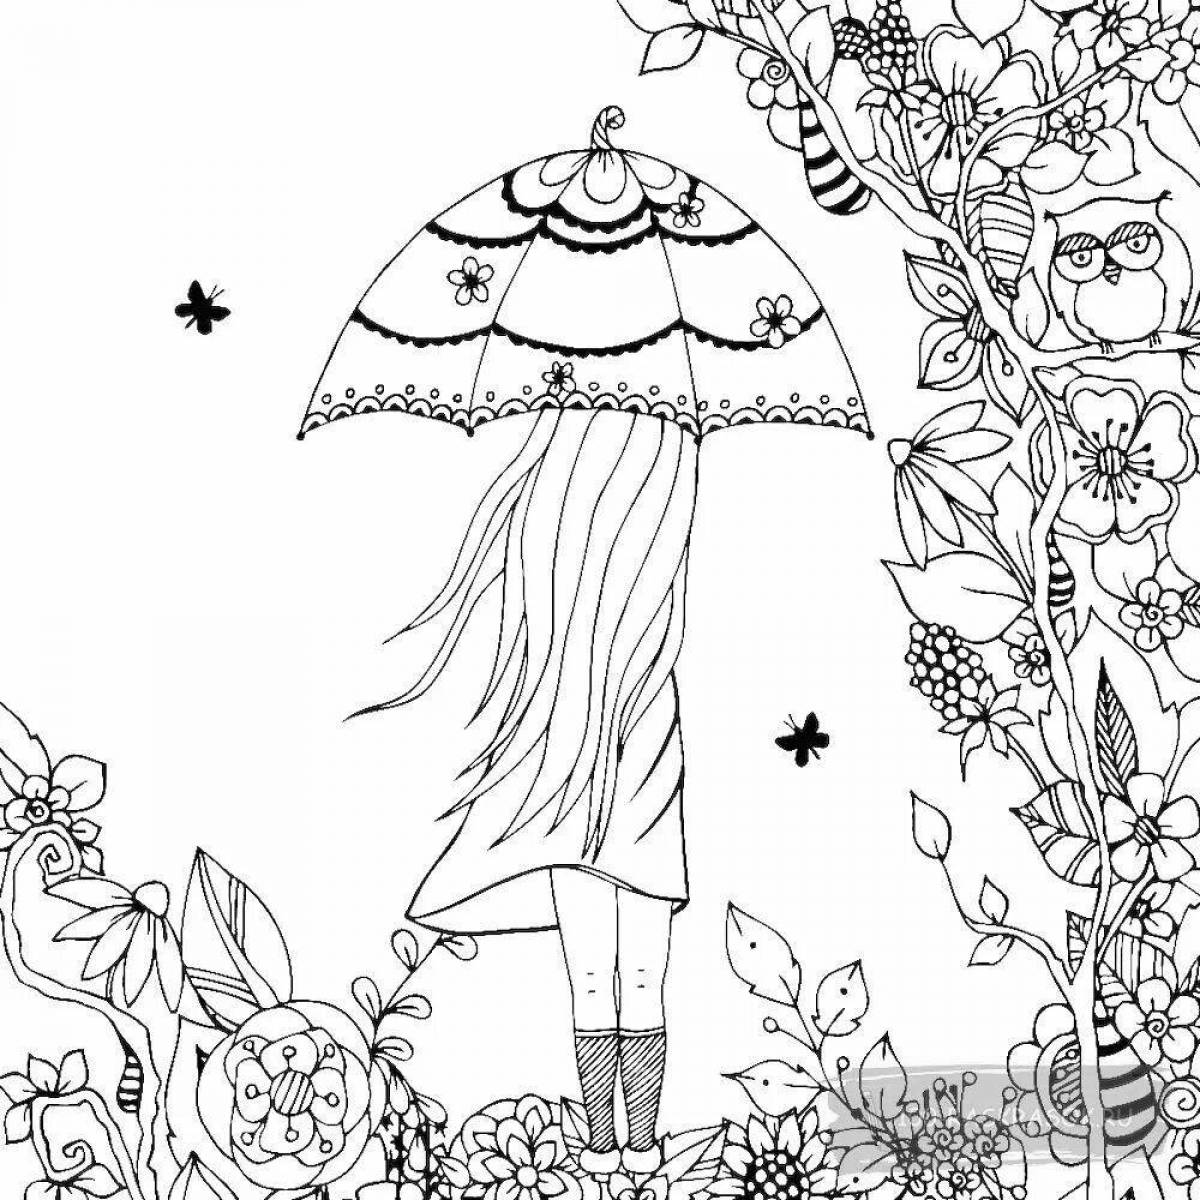 Blissful autumn girl coloring book